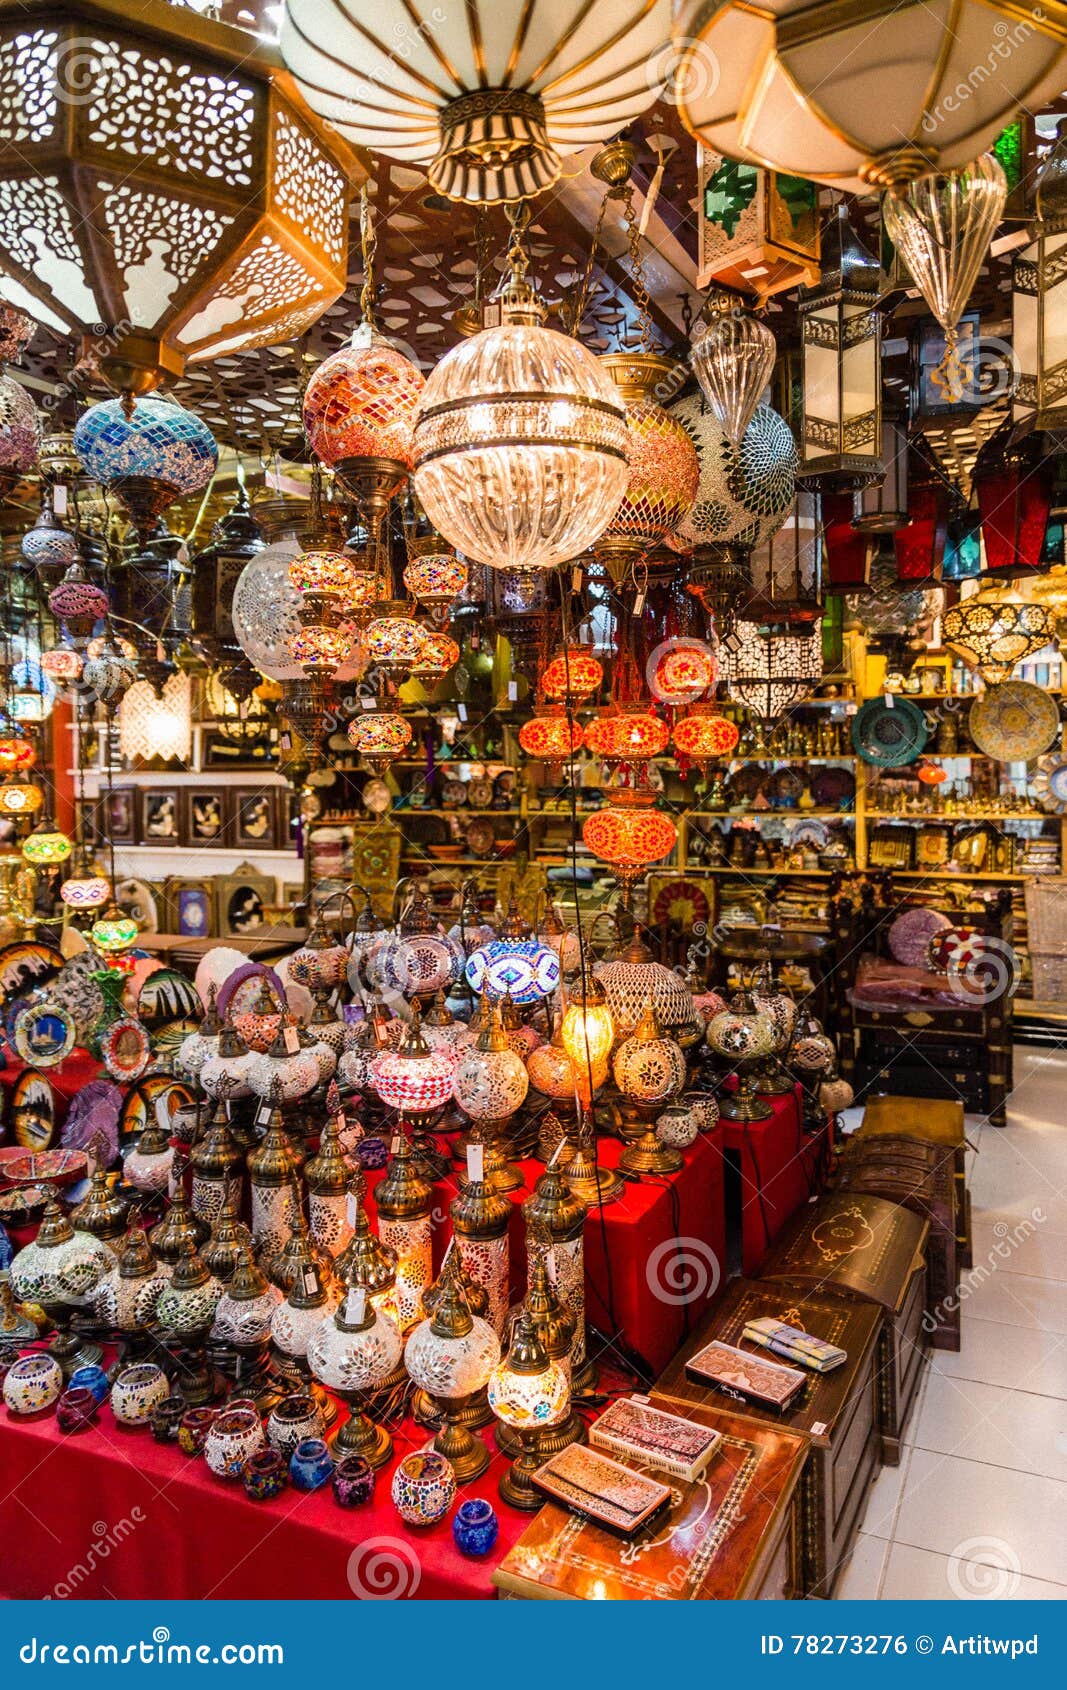 many lamps for sell in the lamp retail in the souk dubai stock photo image of market arabic 78273276